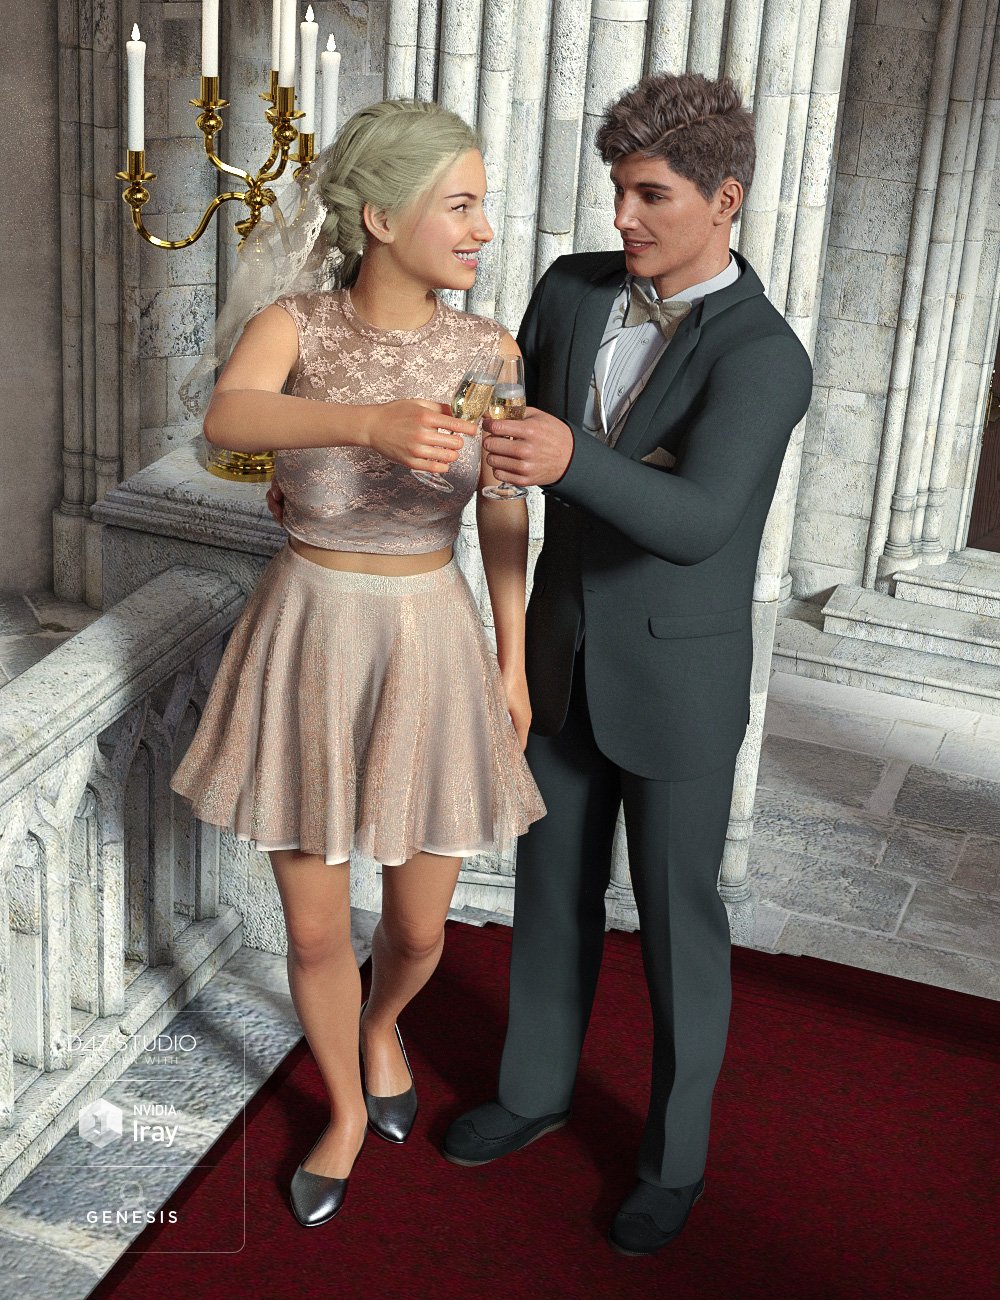 The Wedding Party Poses and Props by: DianePredatron, 3D Models by Daz 3D